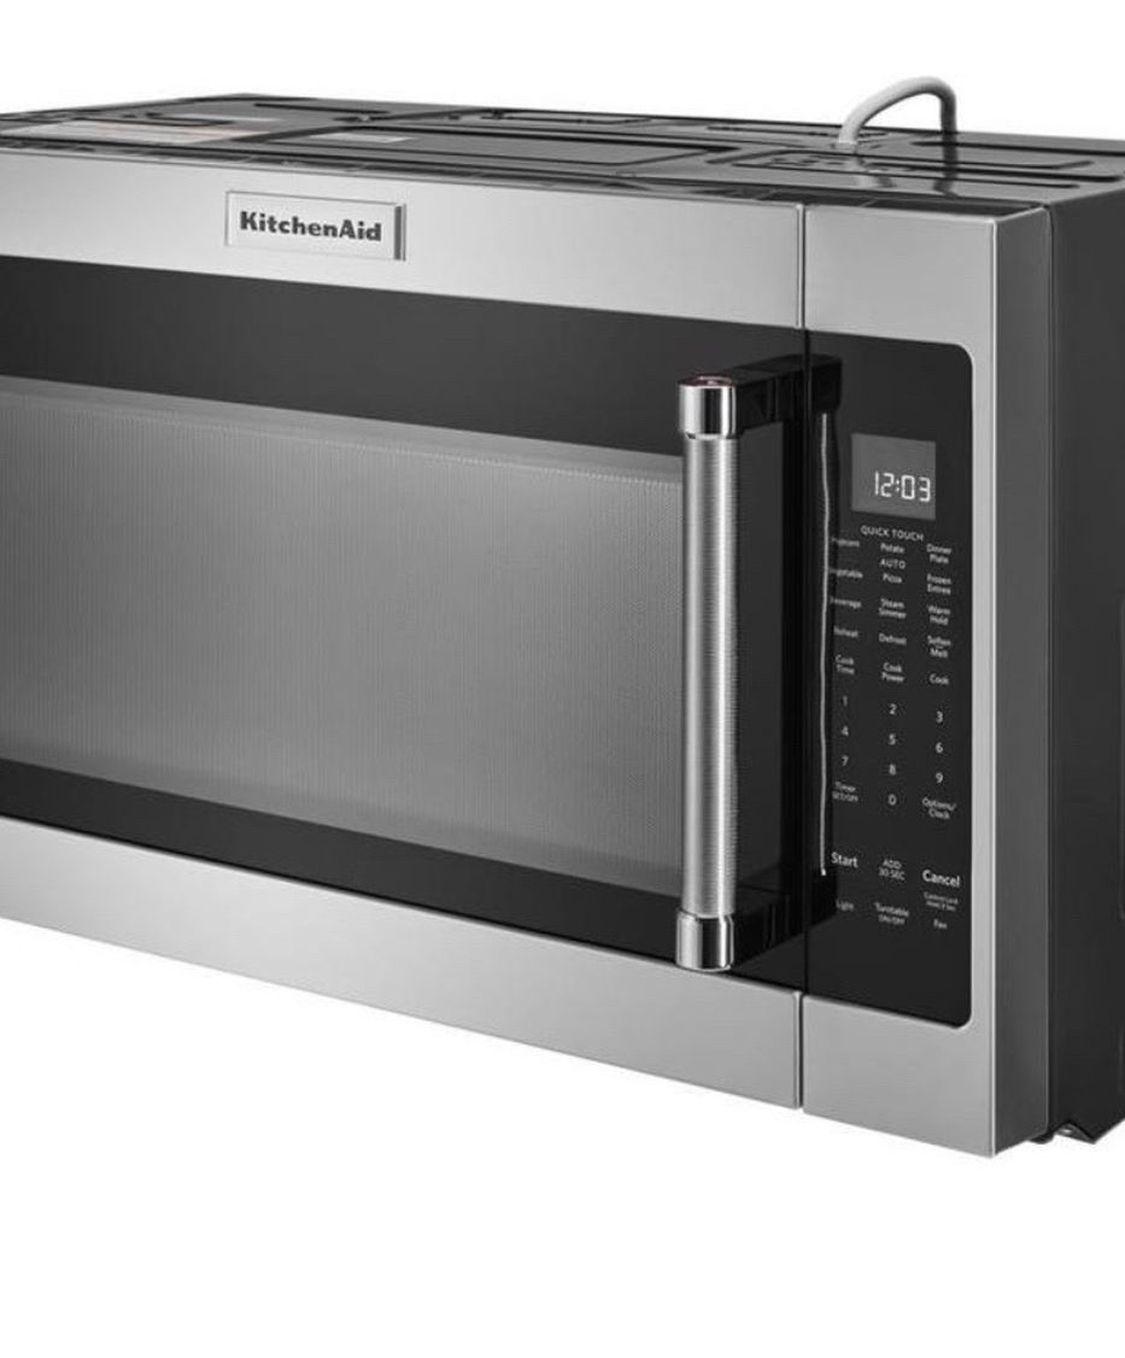 KitchenAid Over the Range Microwave in with Sensor Cooking